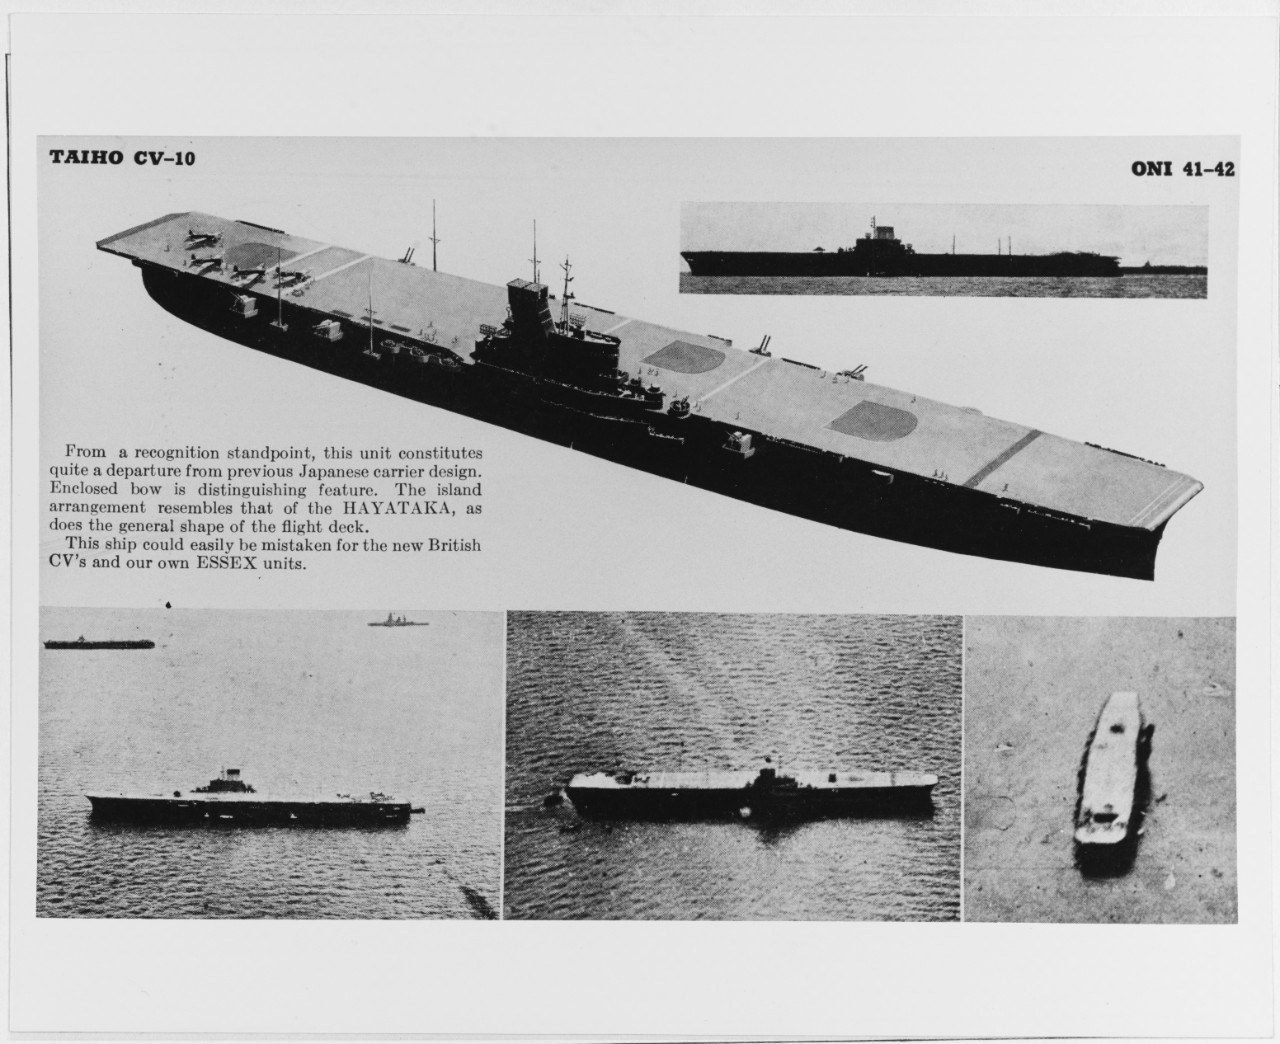 Recognition photograph of Japanese World War II carrier TAIHO CV-10. Plans.